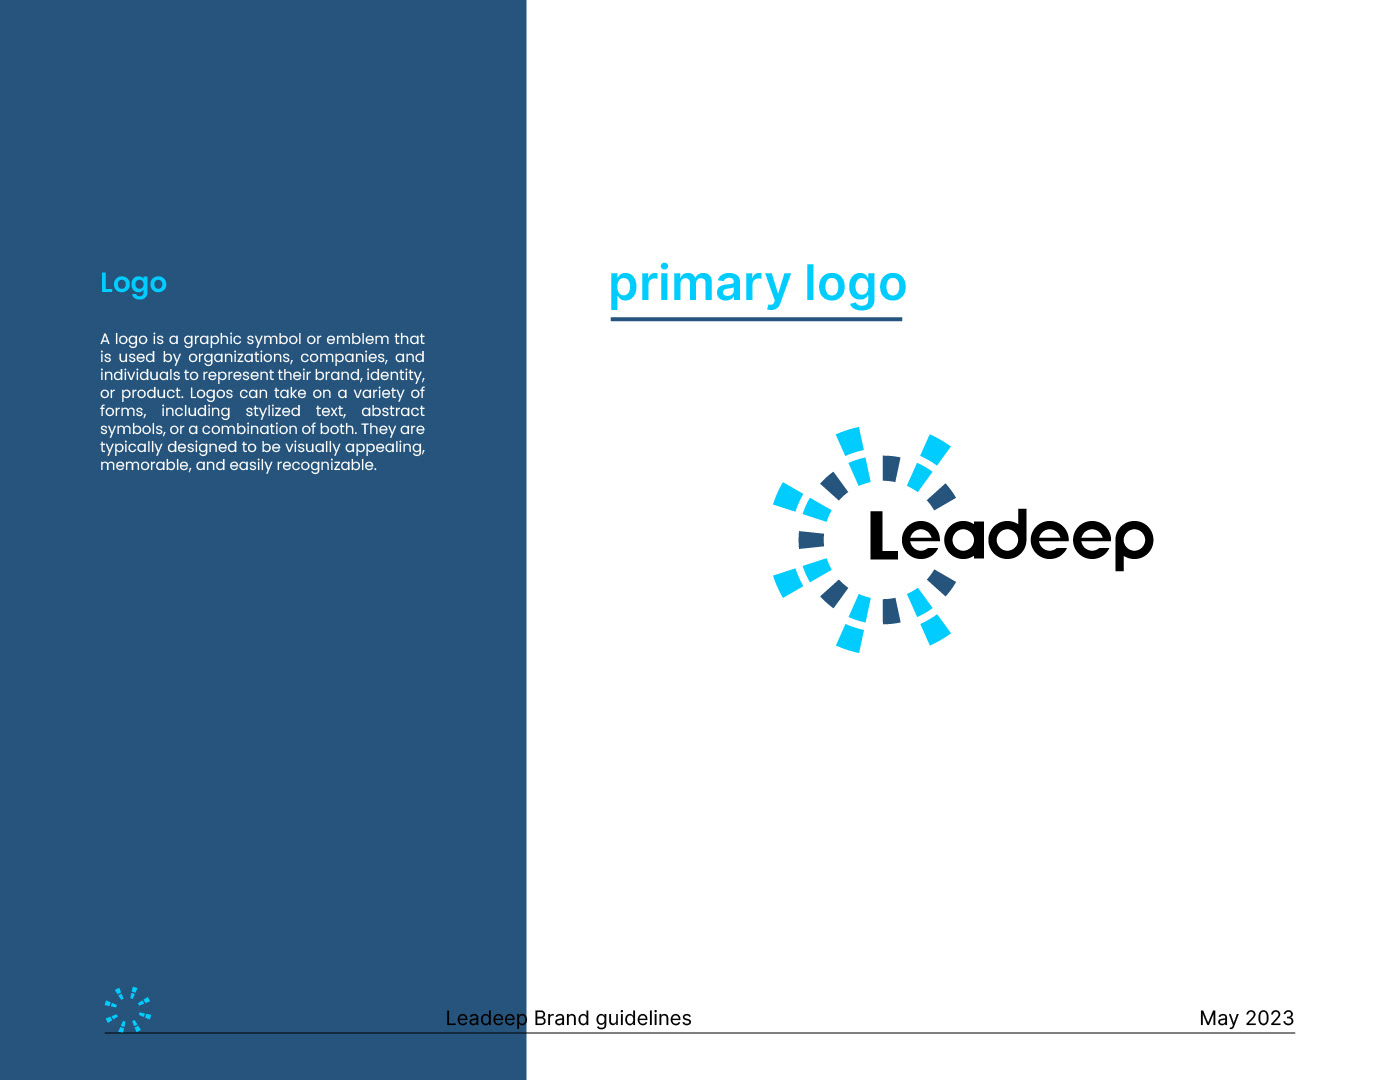 Brand Design brand guidelines brand identity brand style guide corporate energy green power solar visual identity